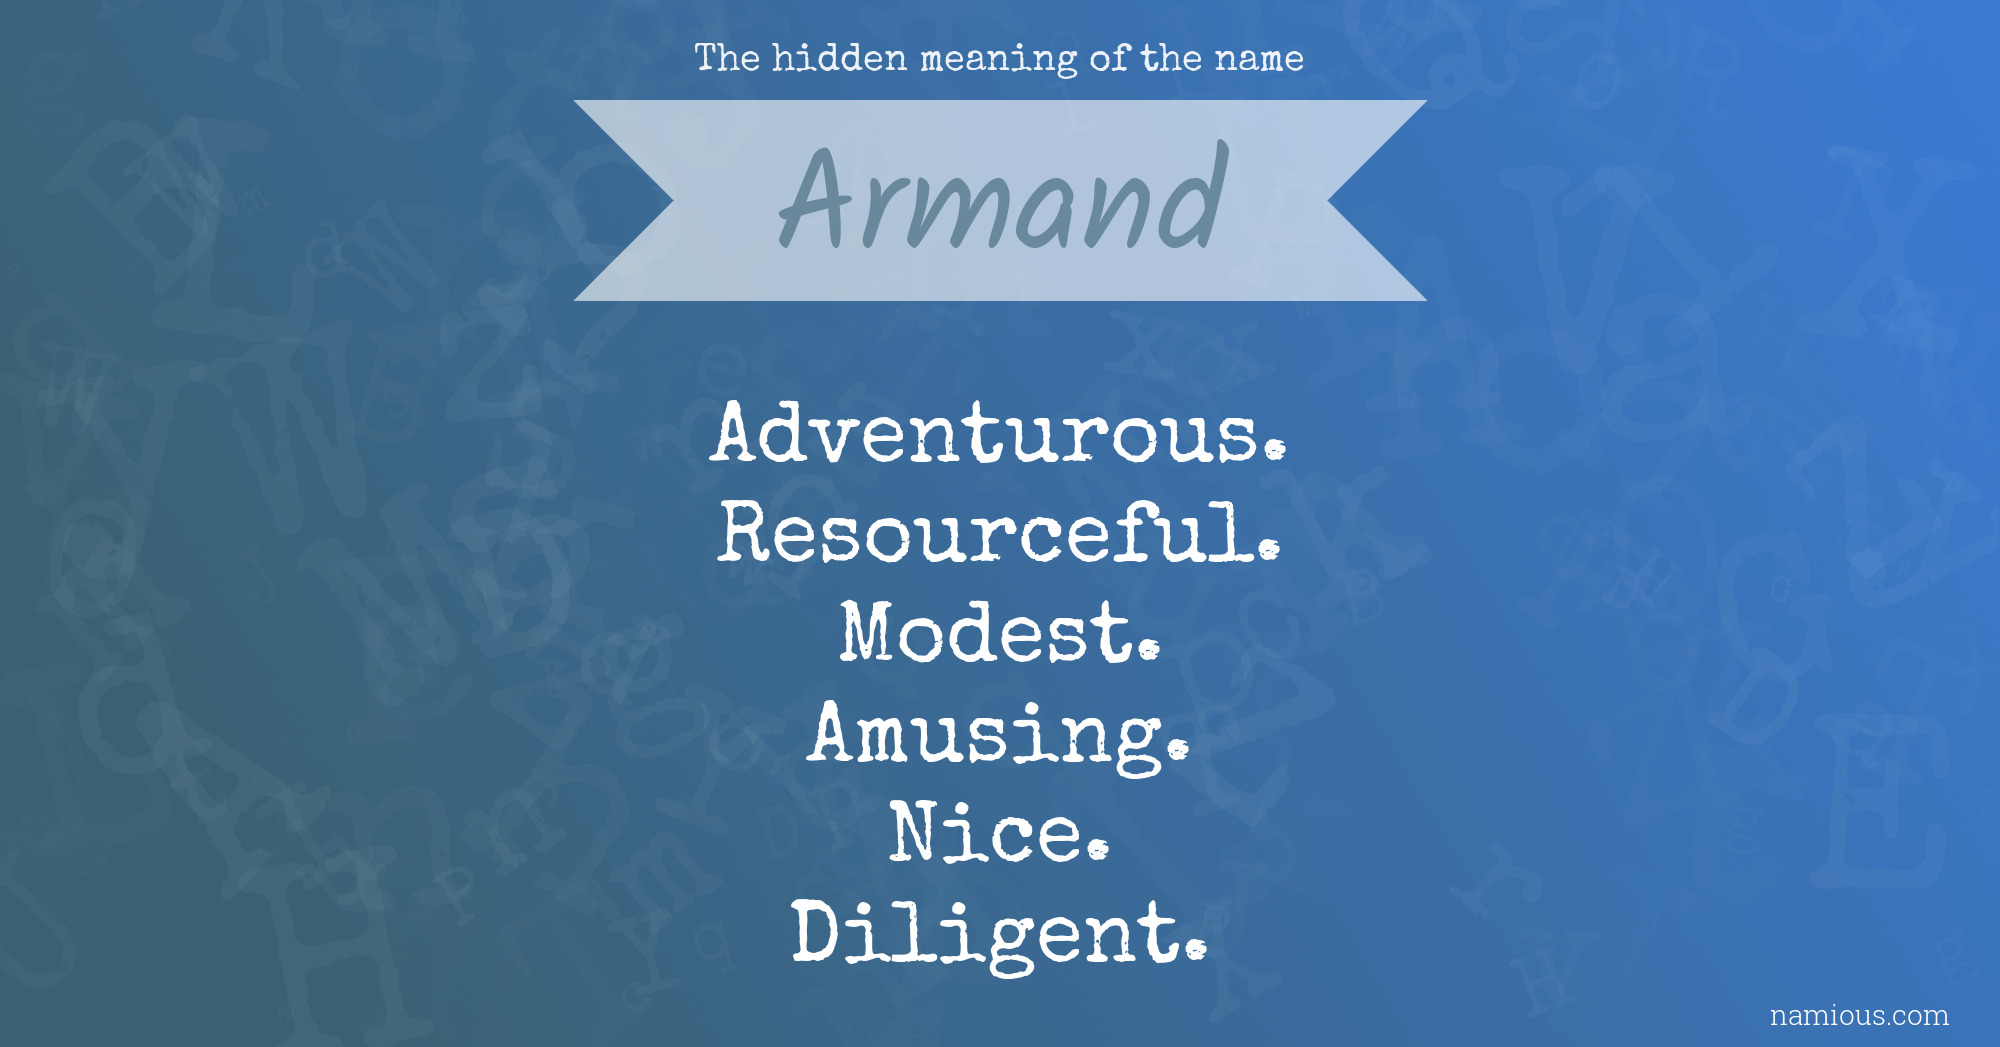 The hidden meaning of the name Armand